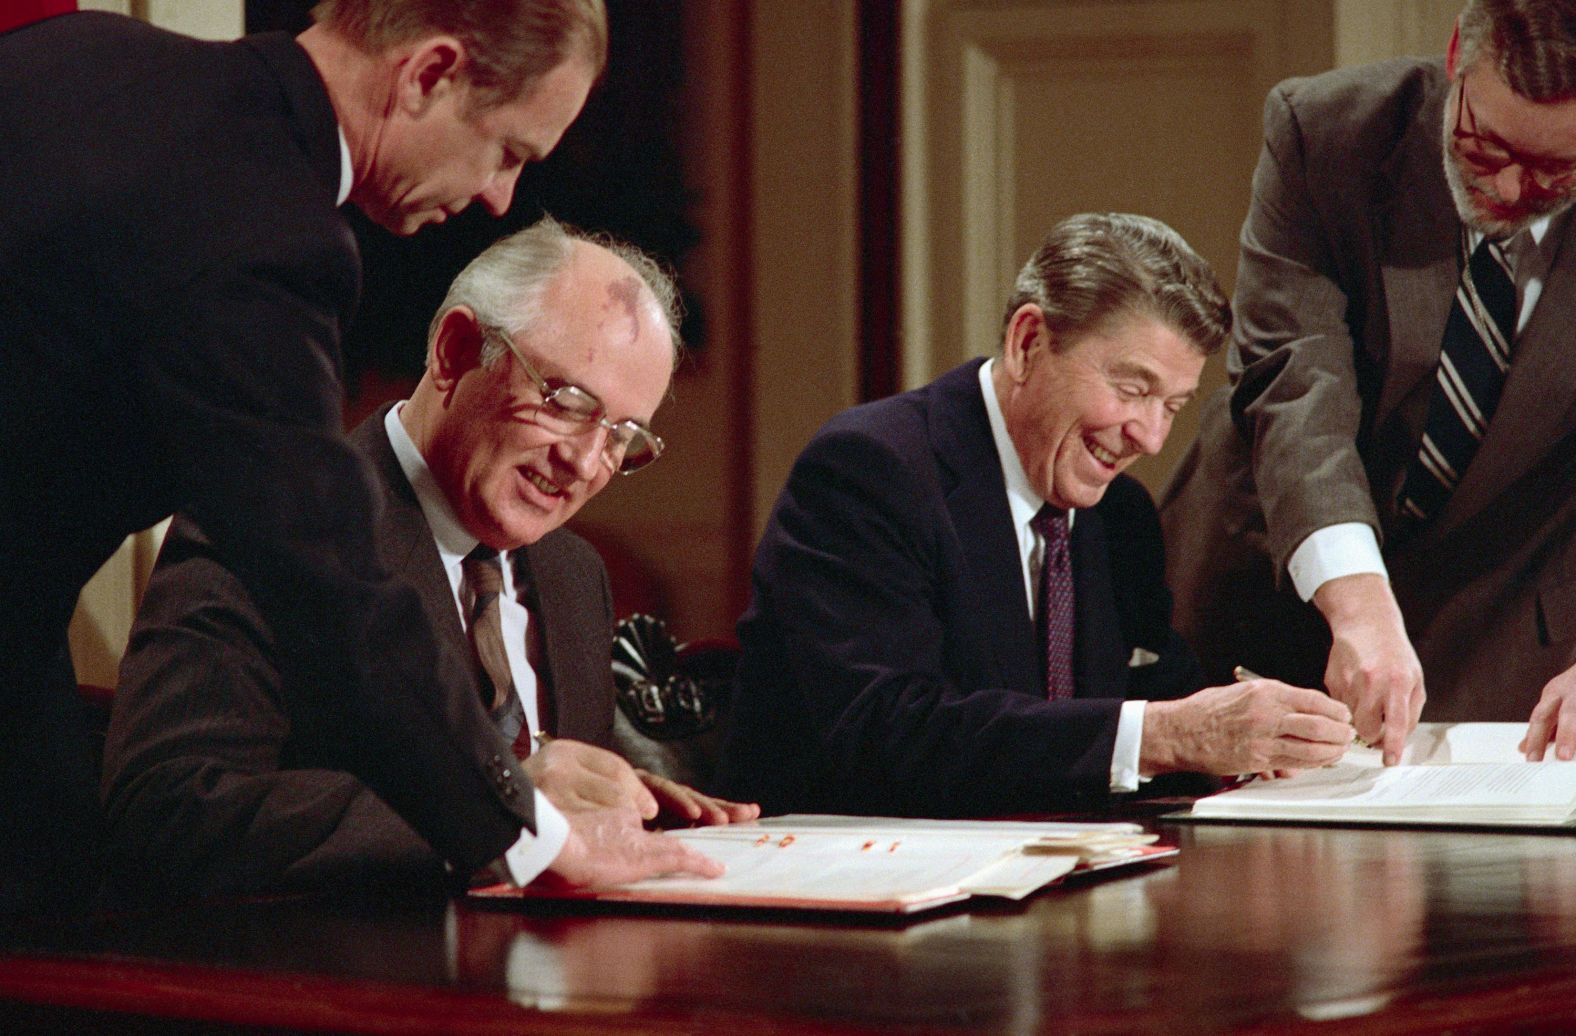 Gorbachev and Reagan sign an arms-control agreement in Washington, DC, in 1987. This came a few months after Reagan gave his famous Berlin Wall Speech, saying "Mr. Gorbachev, tear down this wall!"